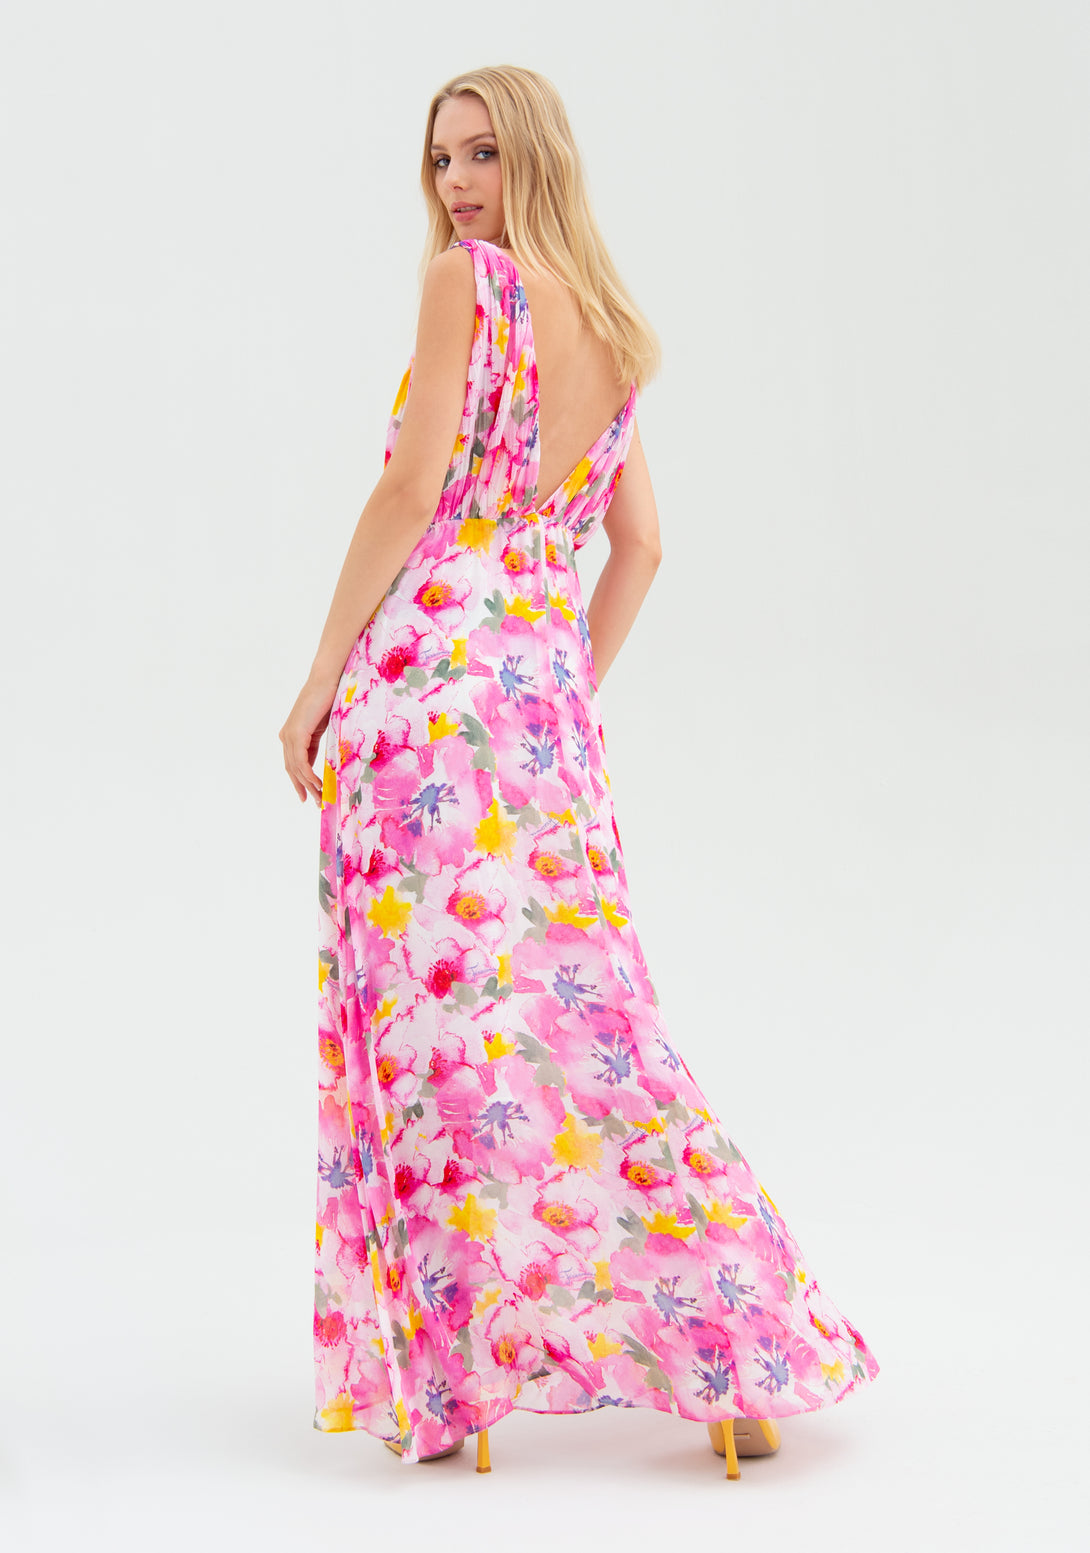 Long dress with flowery pattern and no sleeves